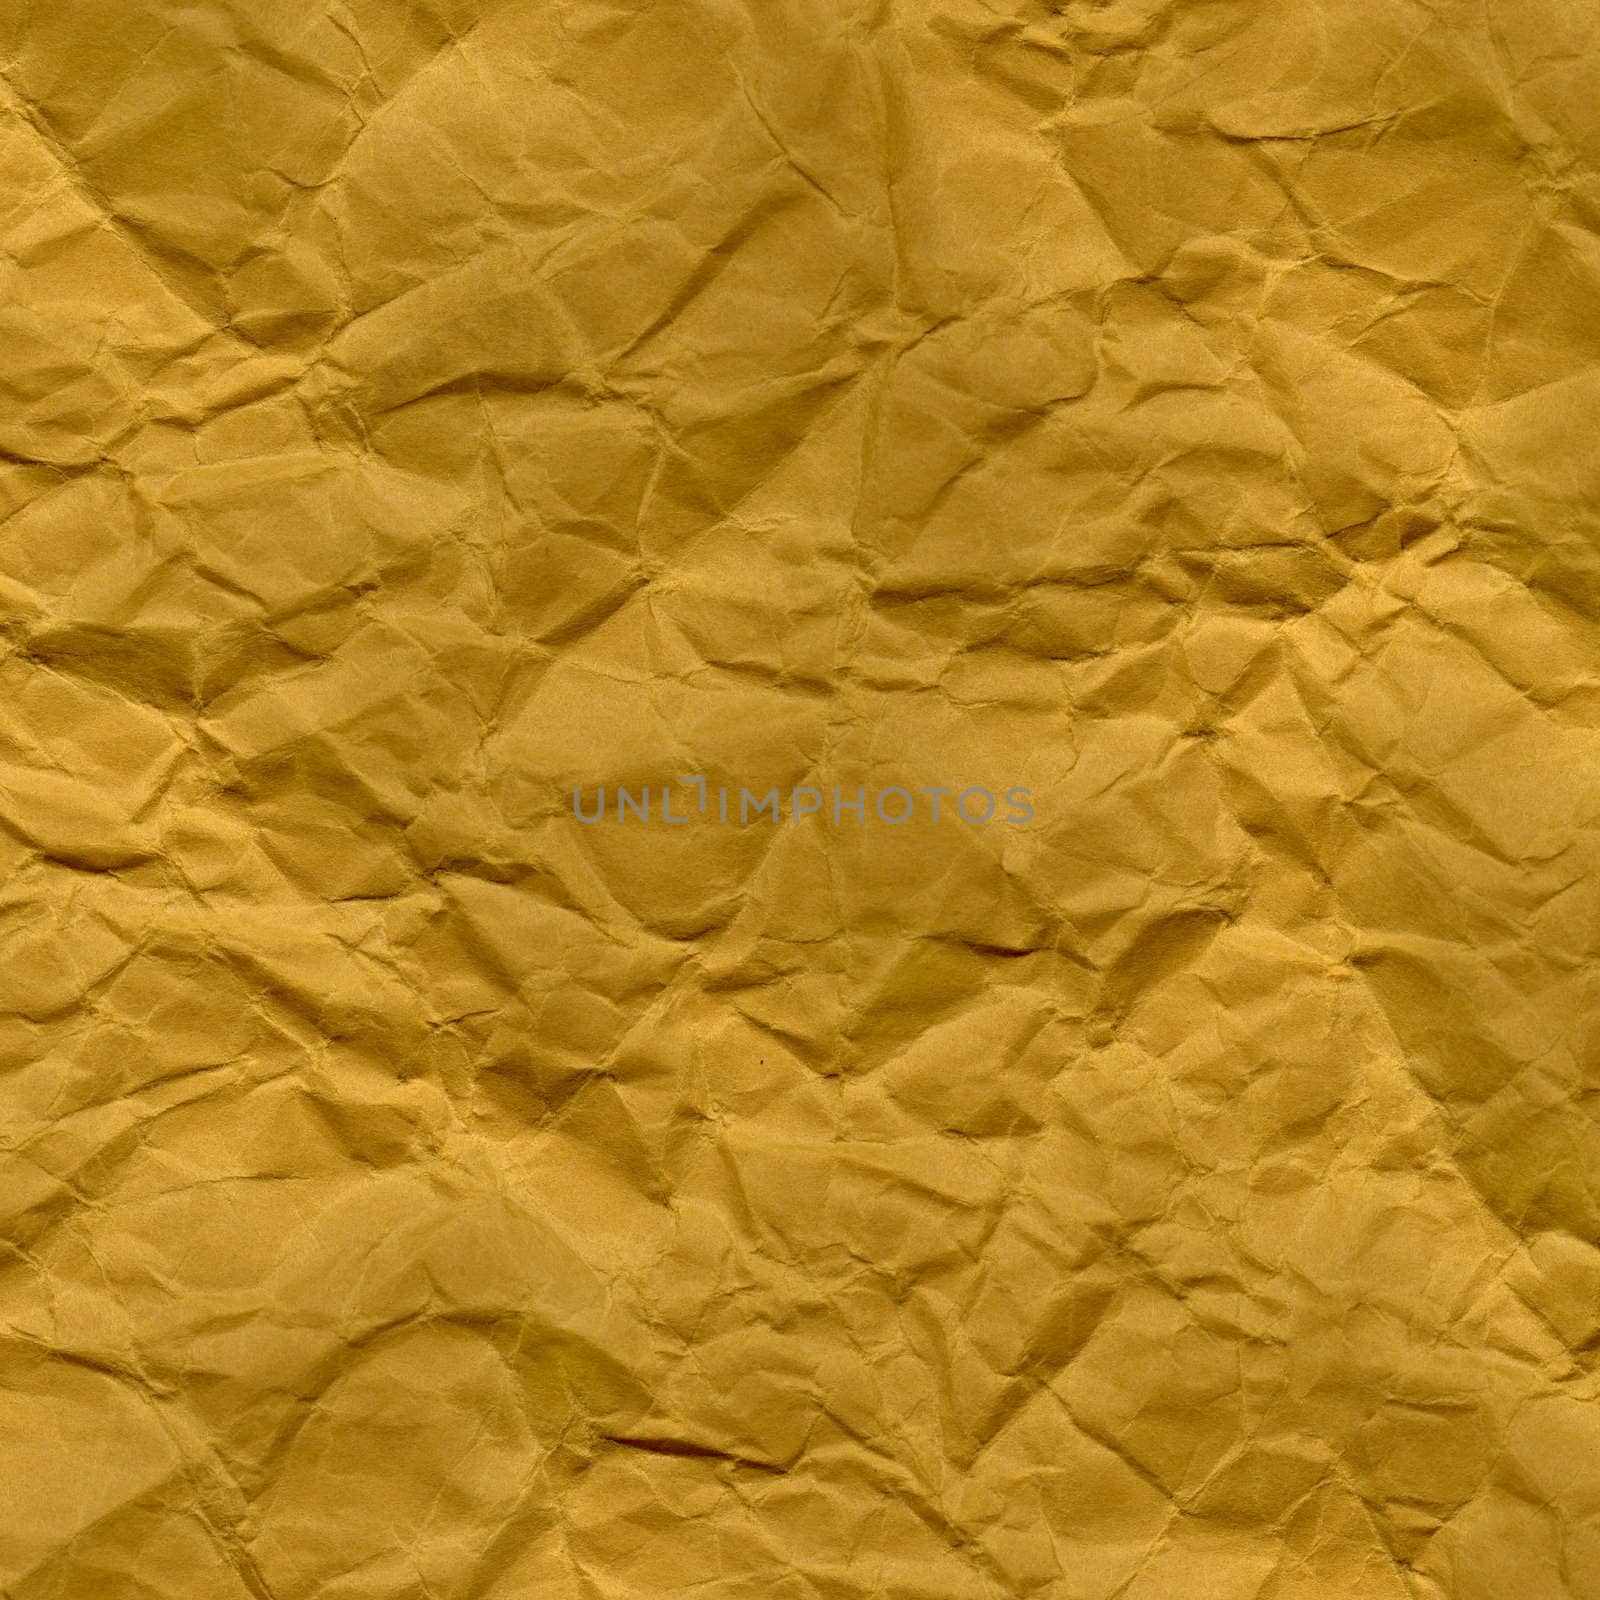 grunge, crumpled, wrinkled and creased yellow paper background